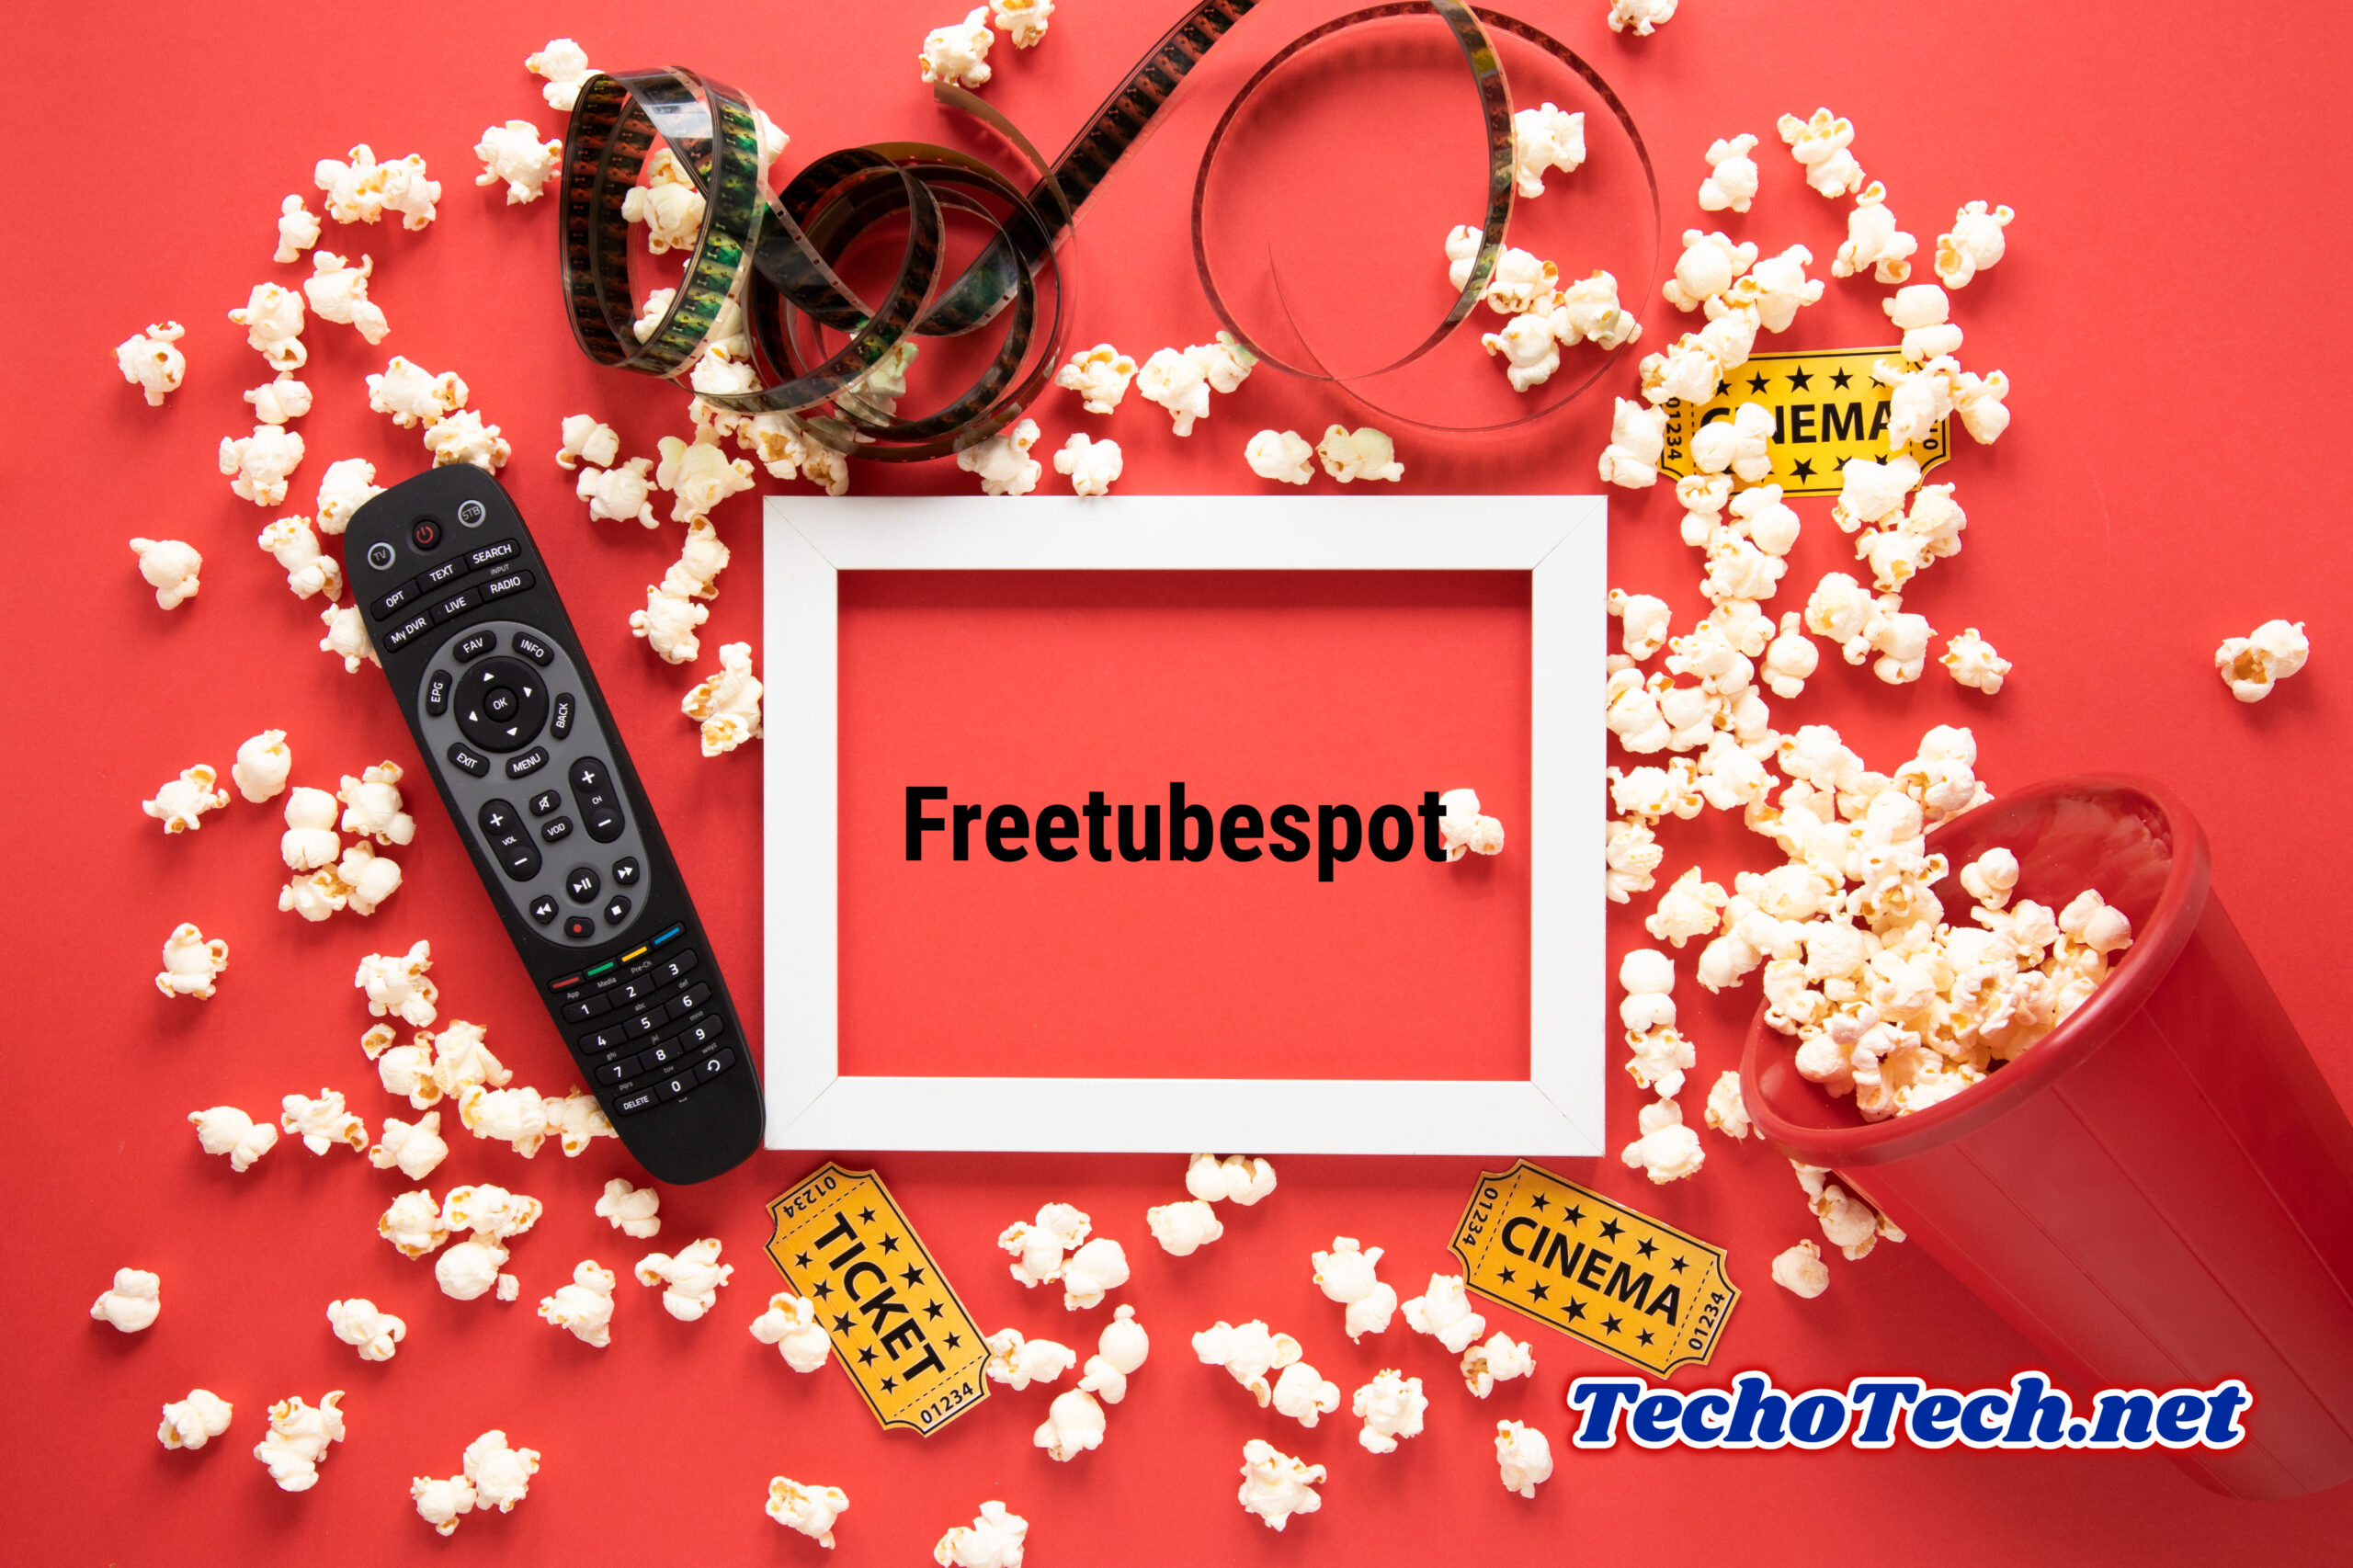 Introducing Freetubespot: The Future of Online Video Watching